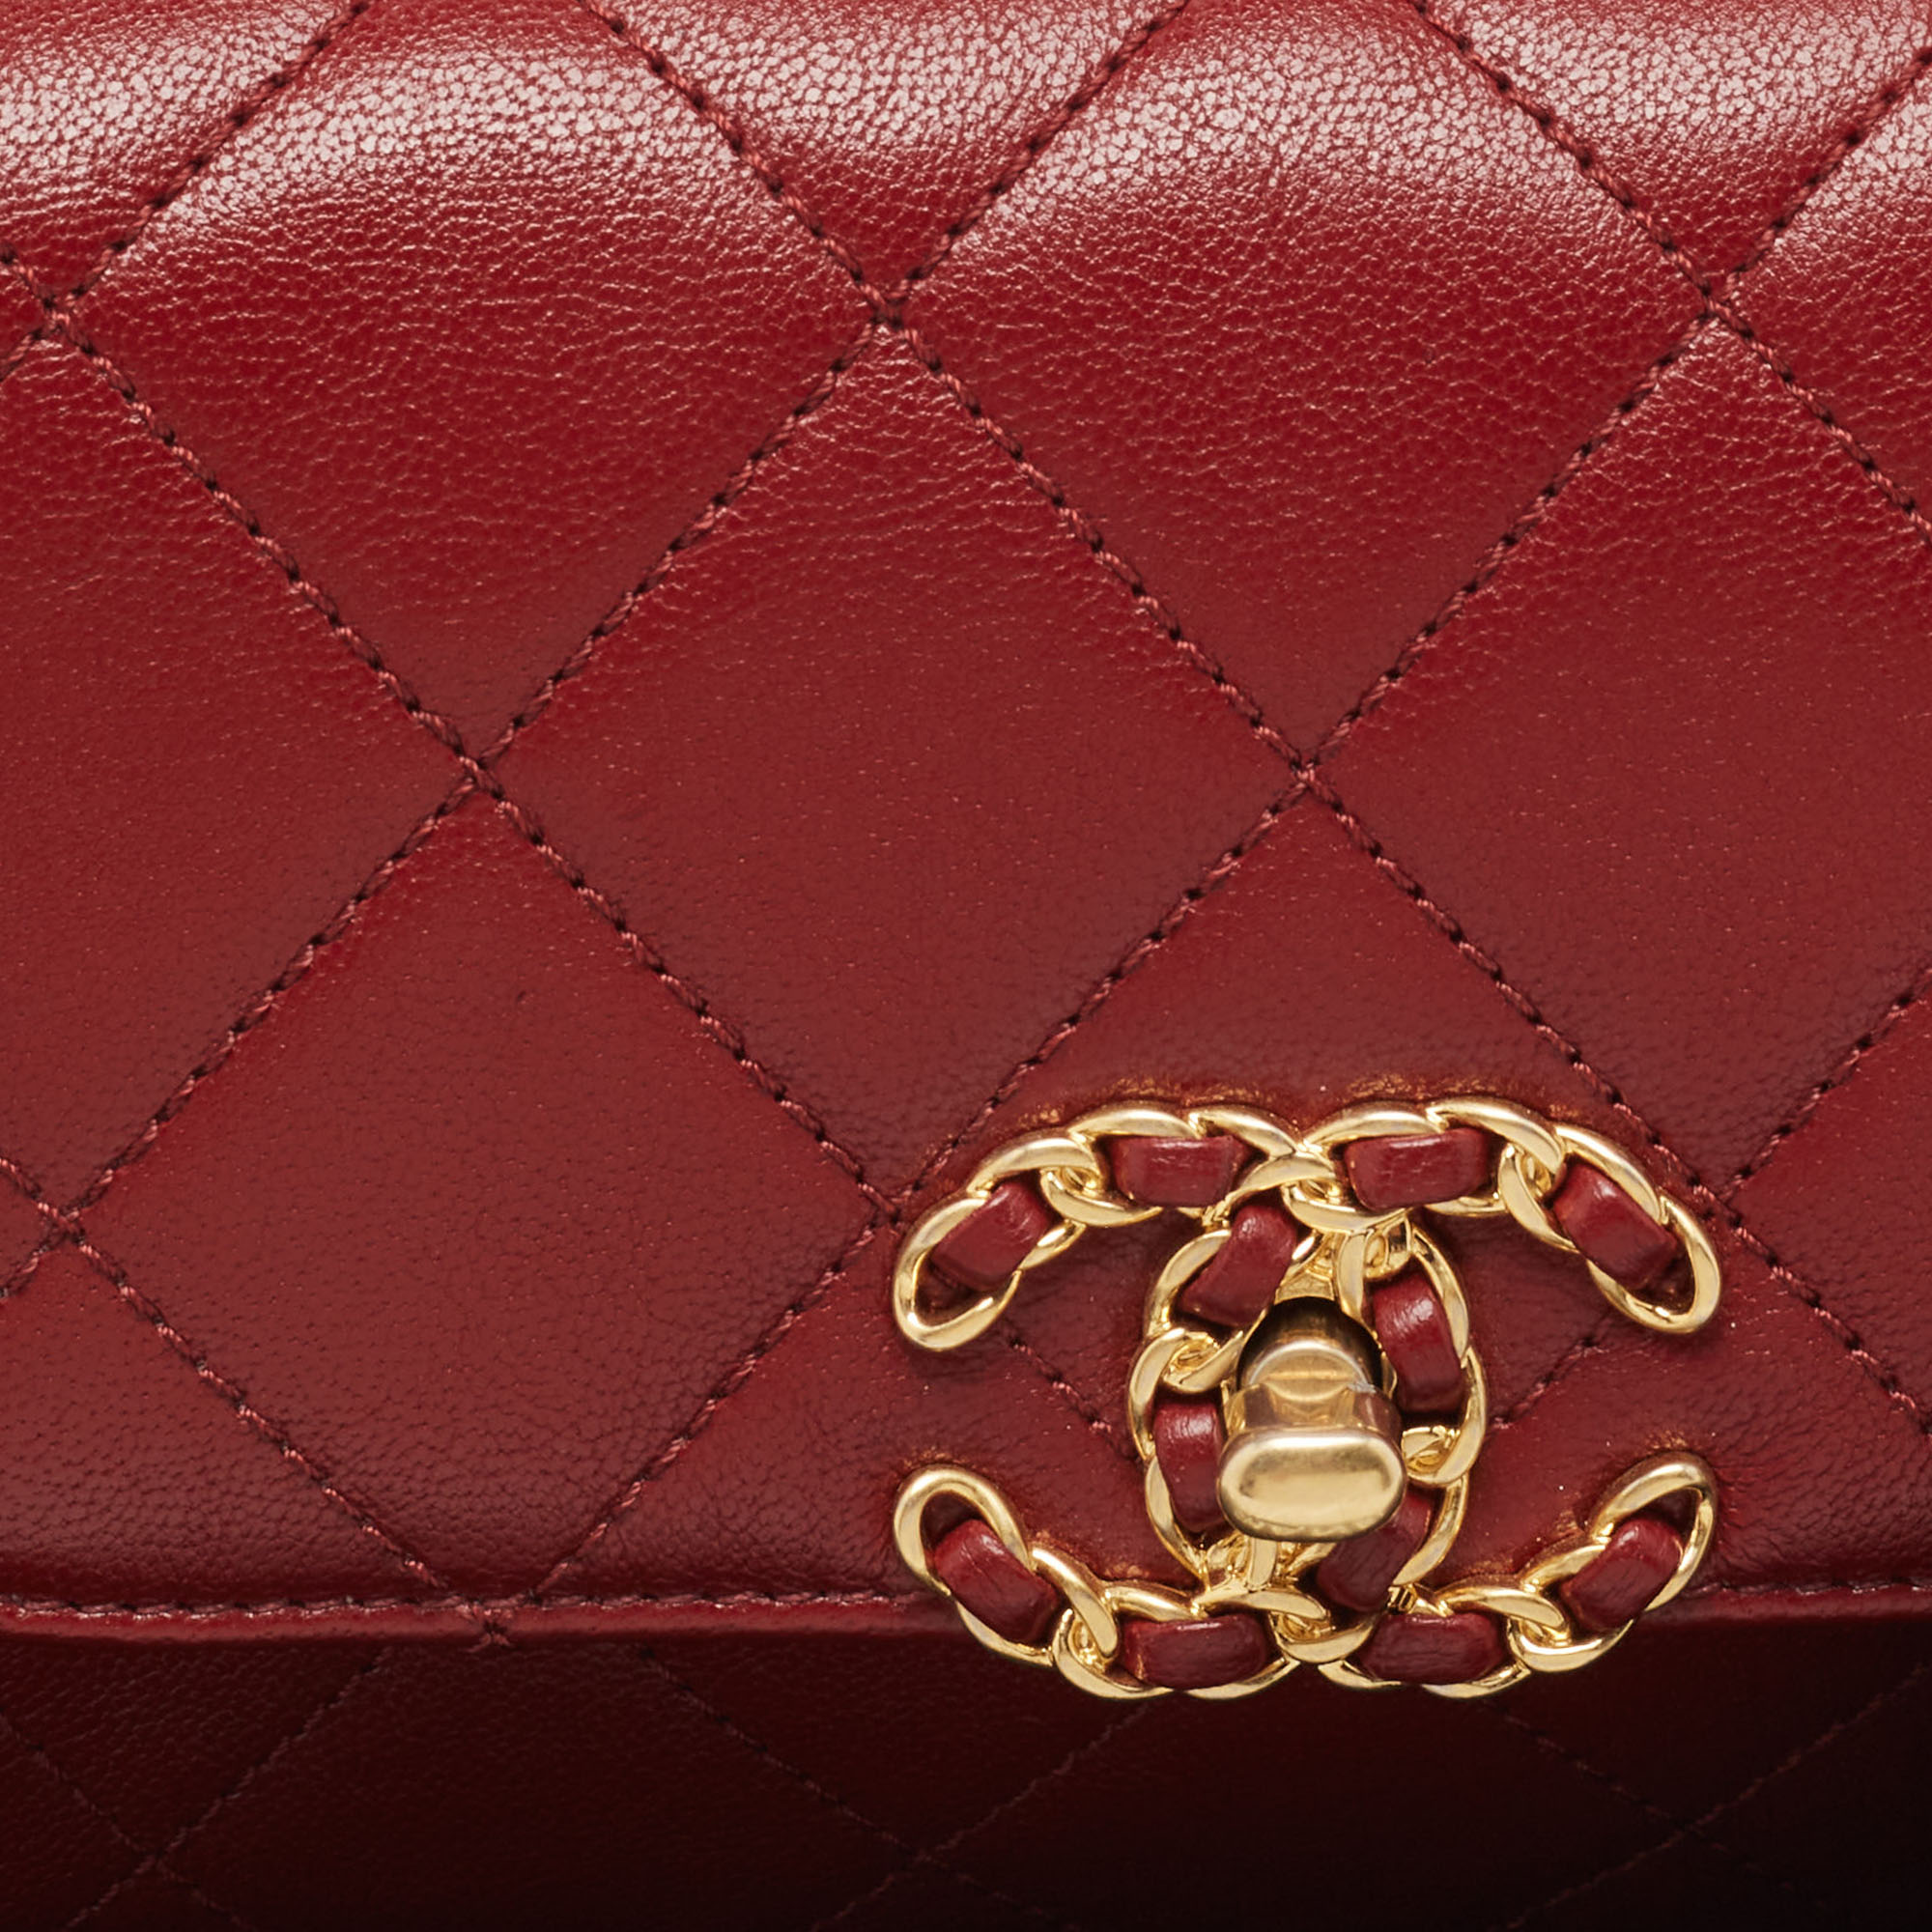 Chanel Dark Red Quilted Leather CC Flap Belt Bag